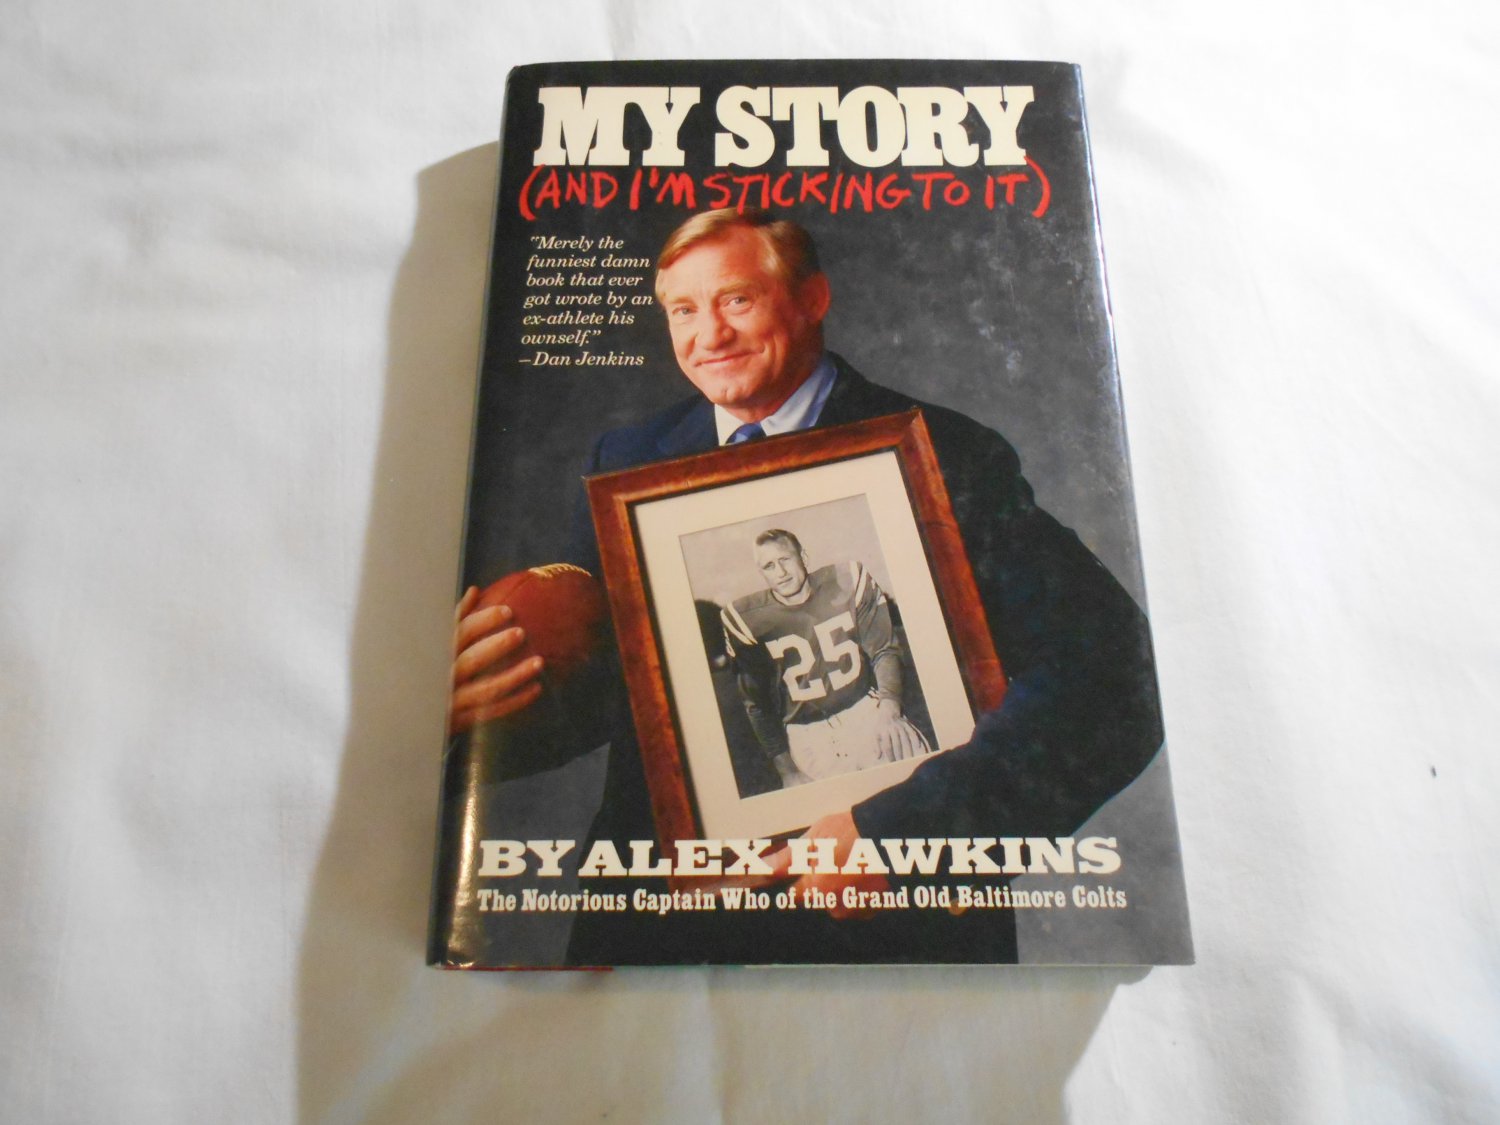 My Story: And I'm Sticking to It by Alex Hawkins (1989) (84) Biography, Sports, Football